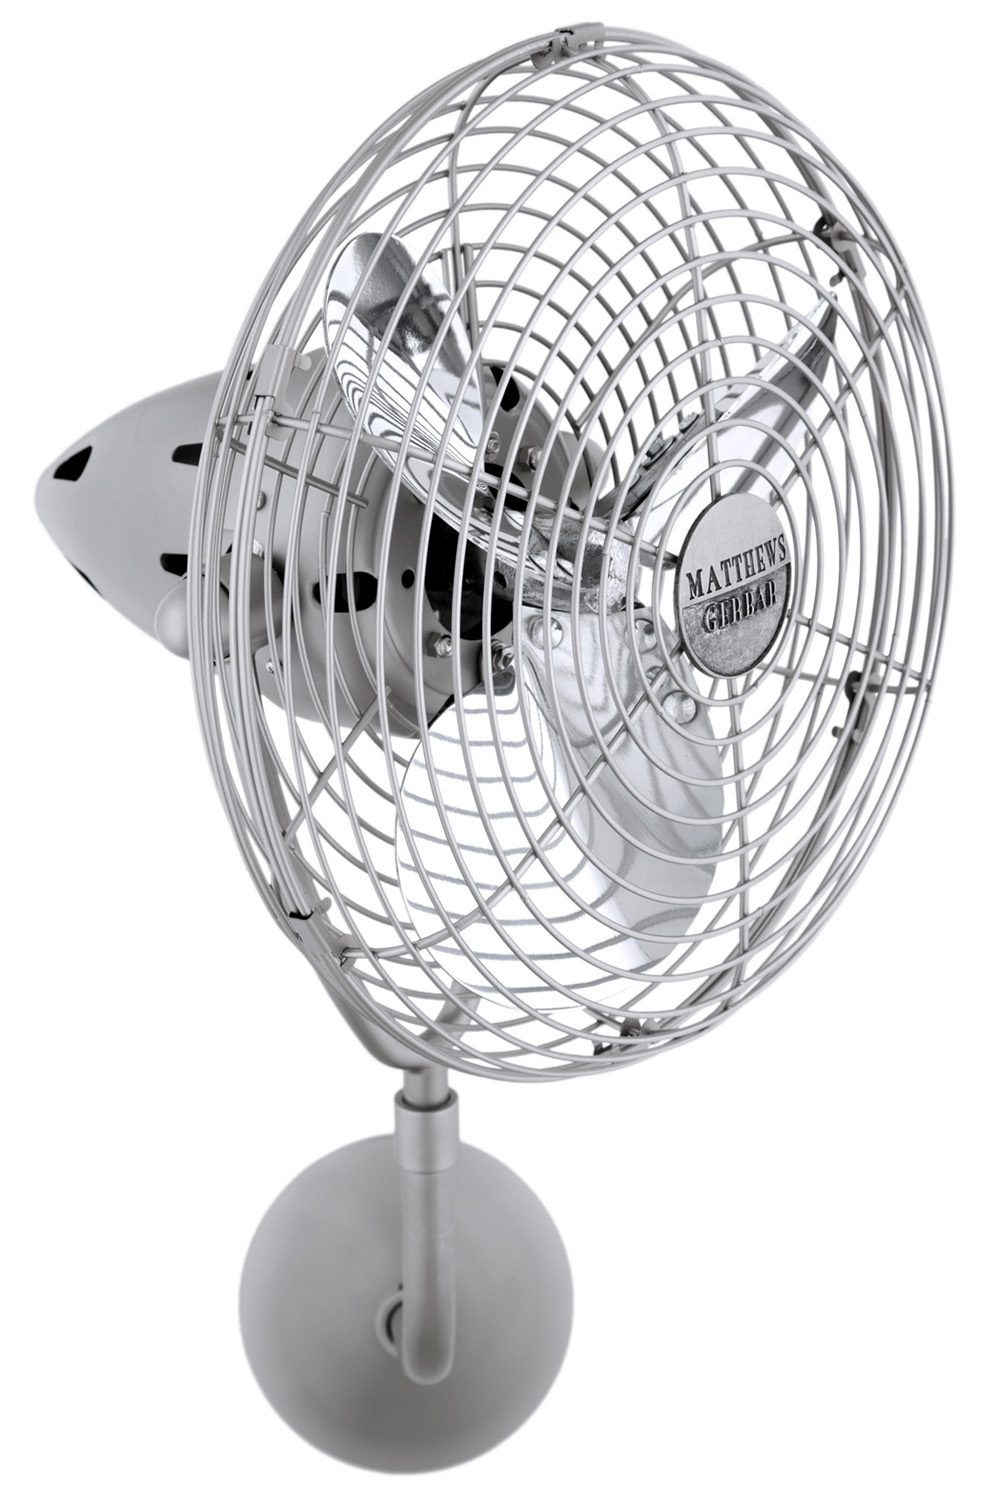 Bruna Parede wall fan in Brushed Nickel finish made by Matthews